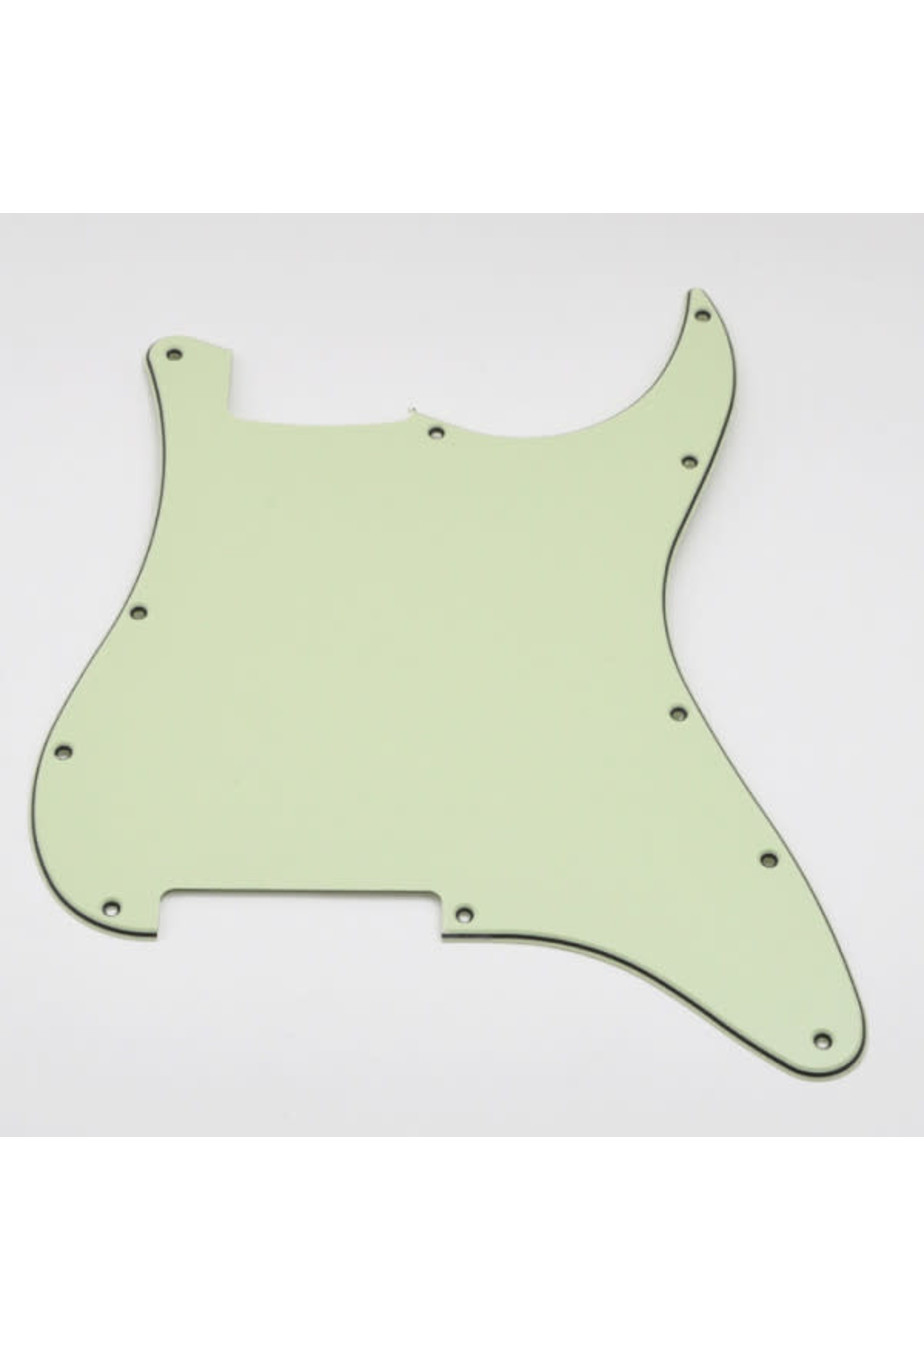 WD Music WD Custom pickguard for Strat, Parchment 3-ply (BLANK)